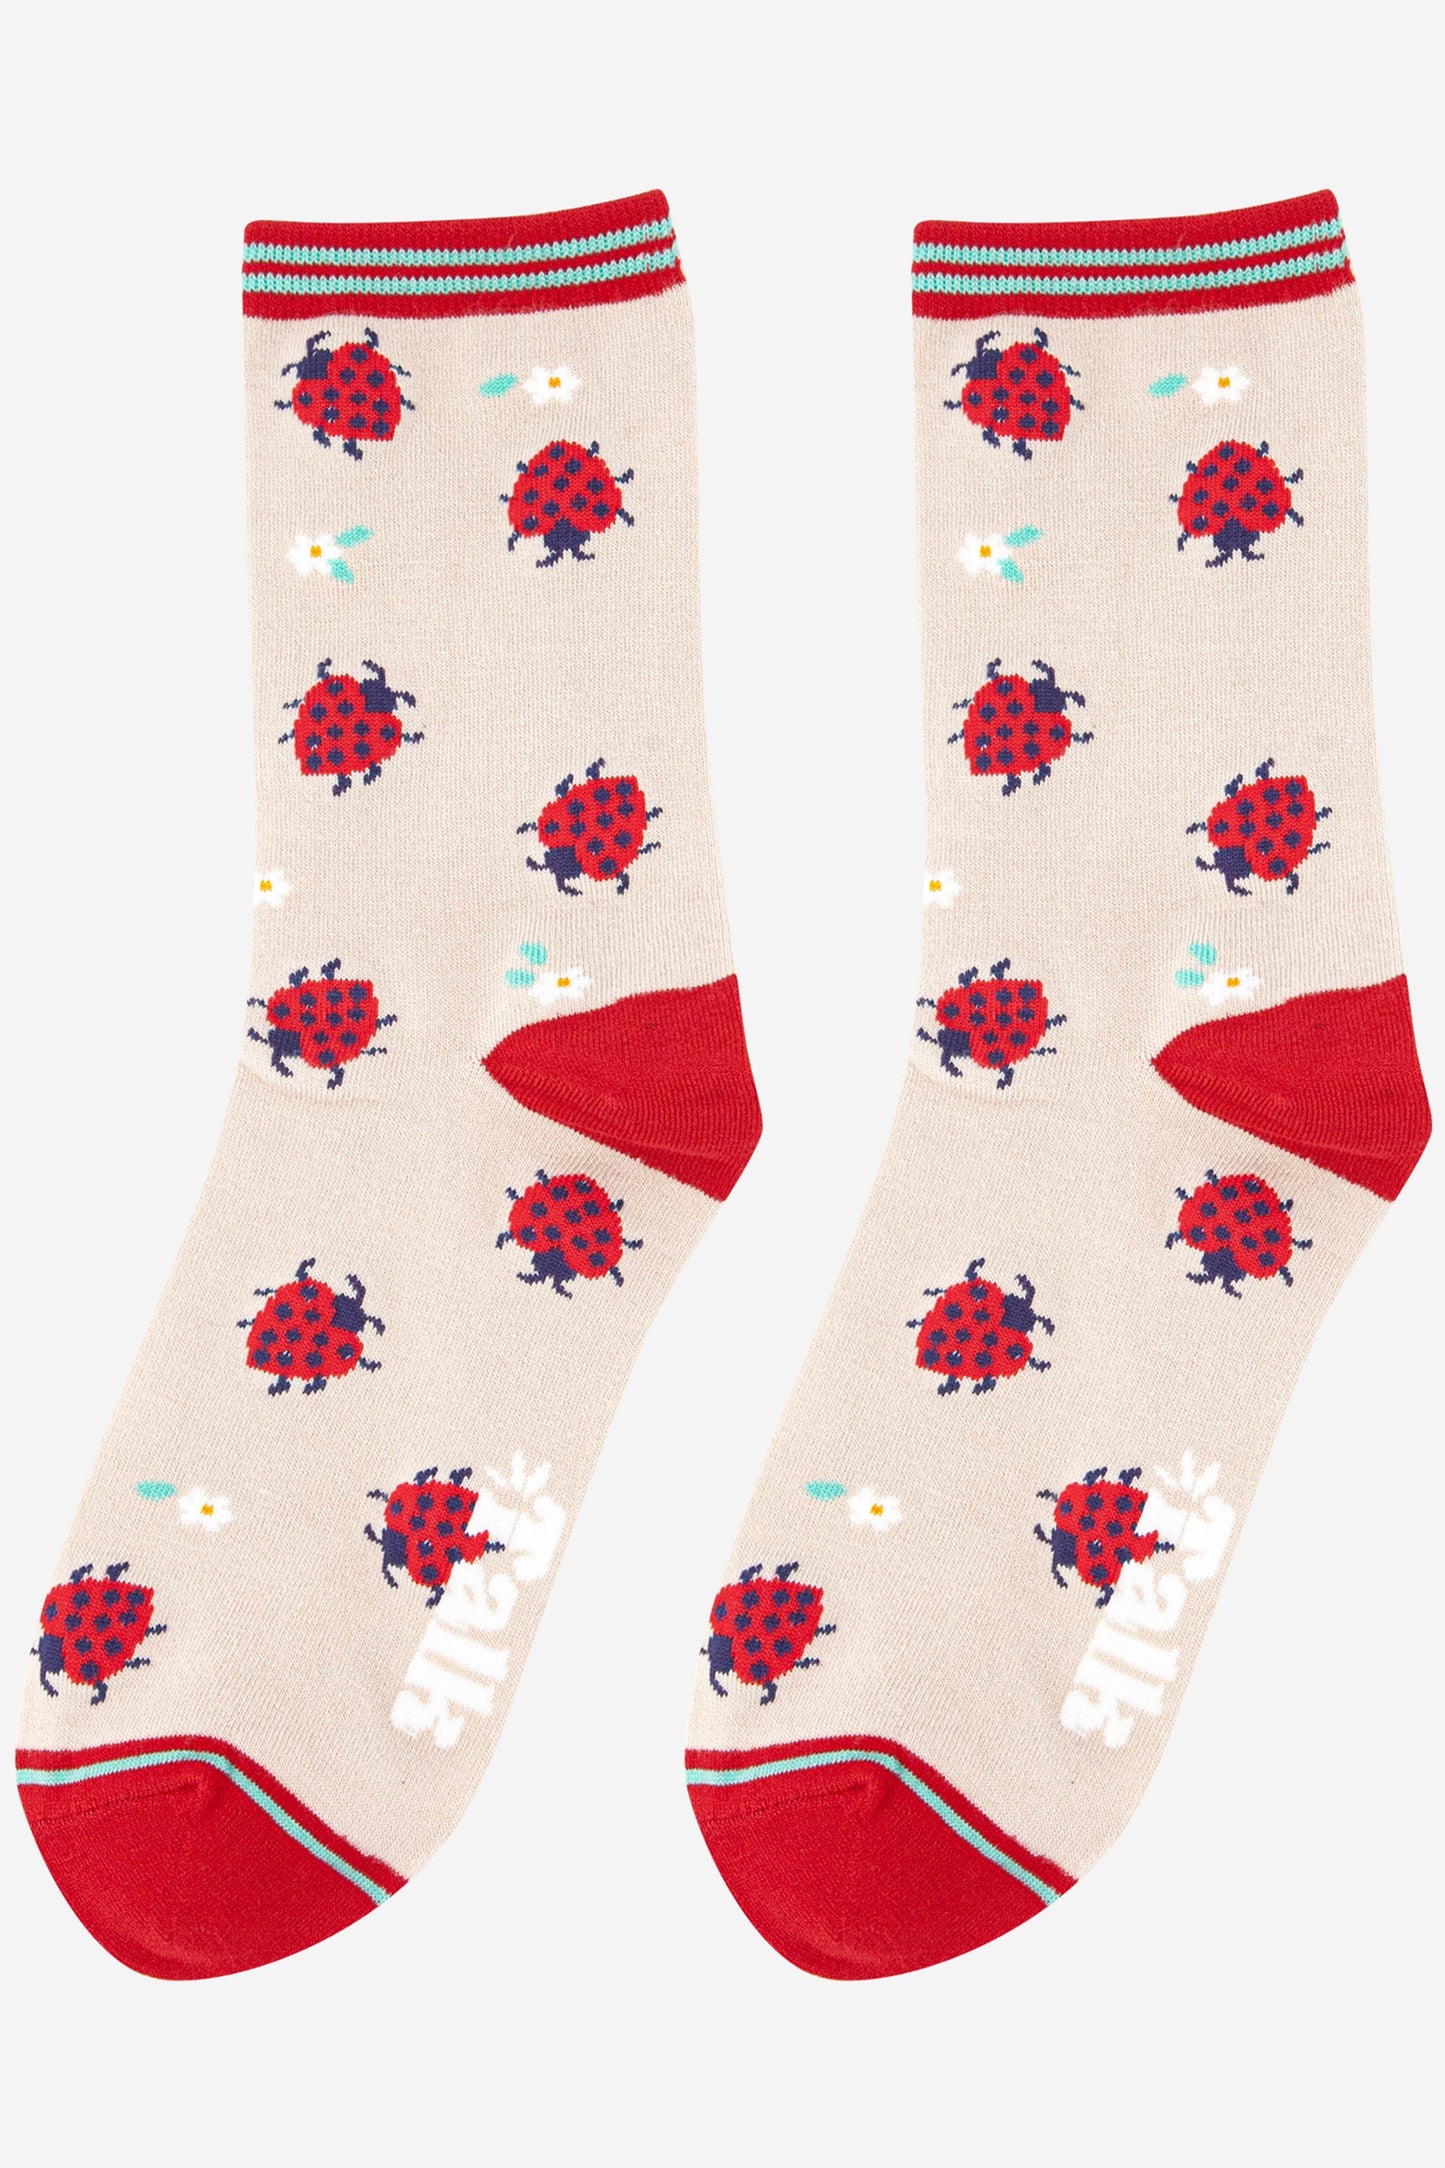 cream and red bamboo socks featuring ladybirds and flowers